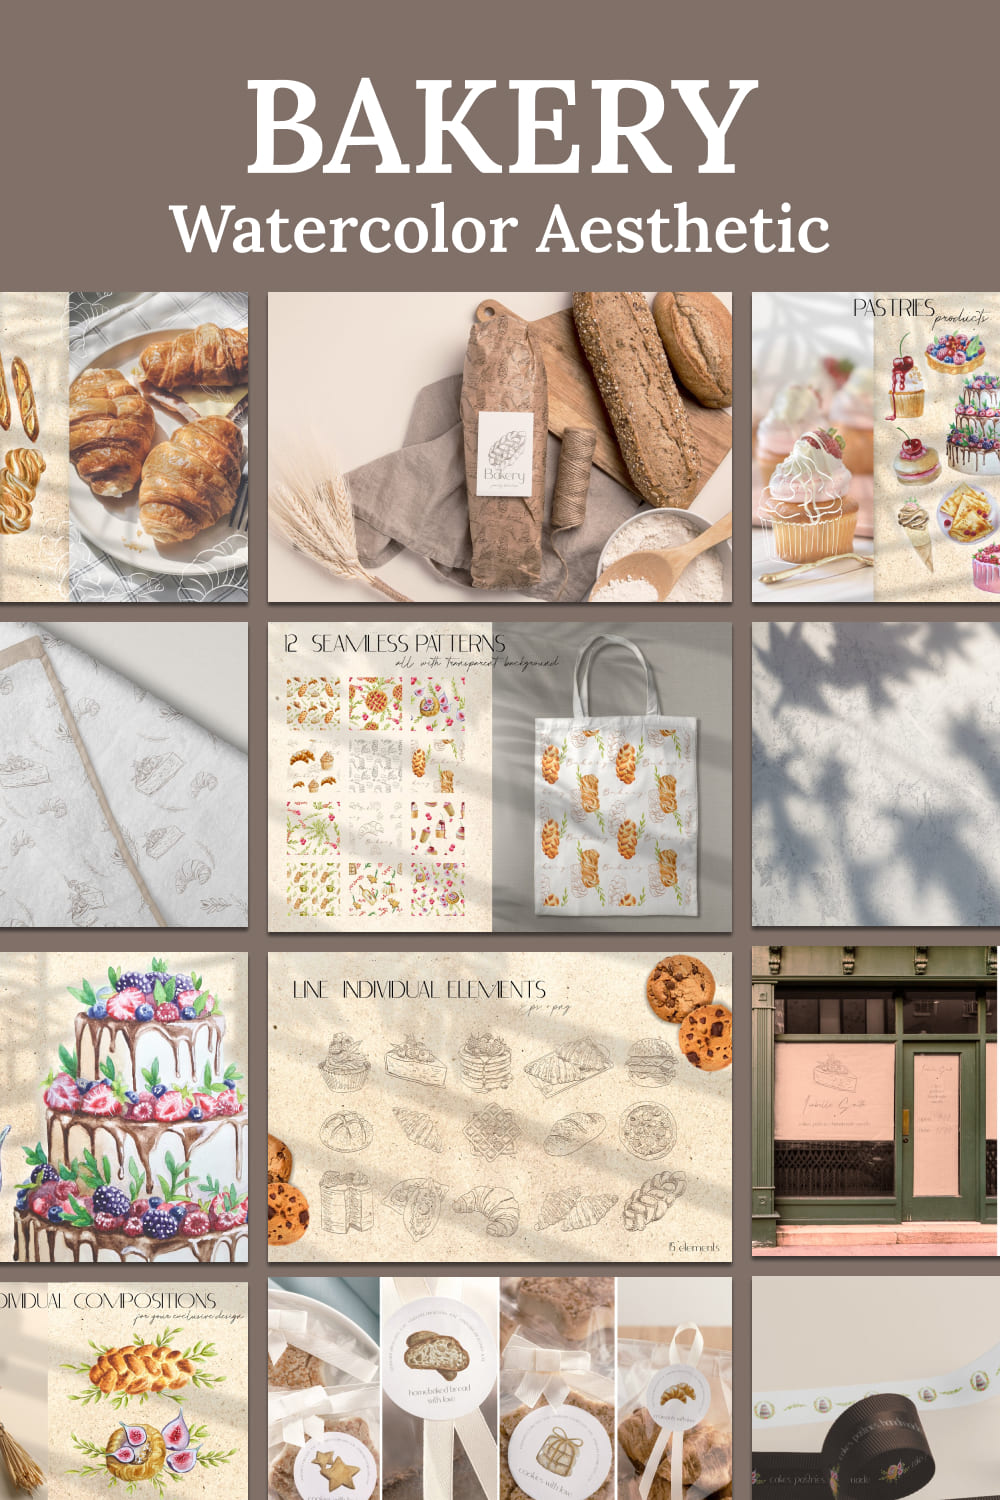 Bakery watercolor aesthetic - pinterest image preview.